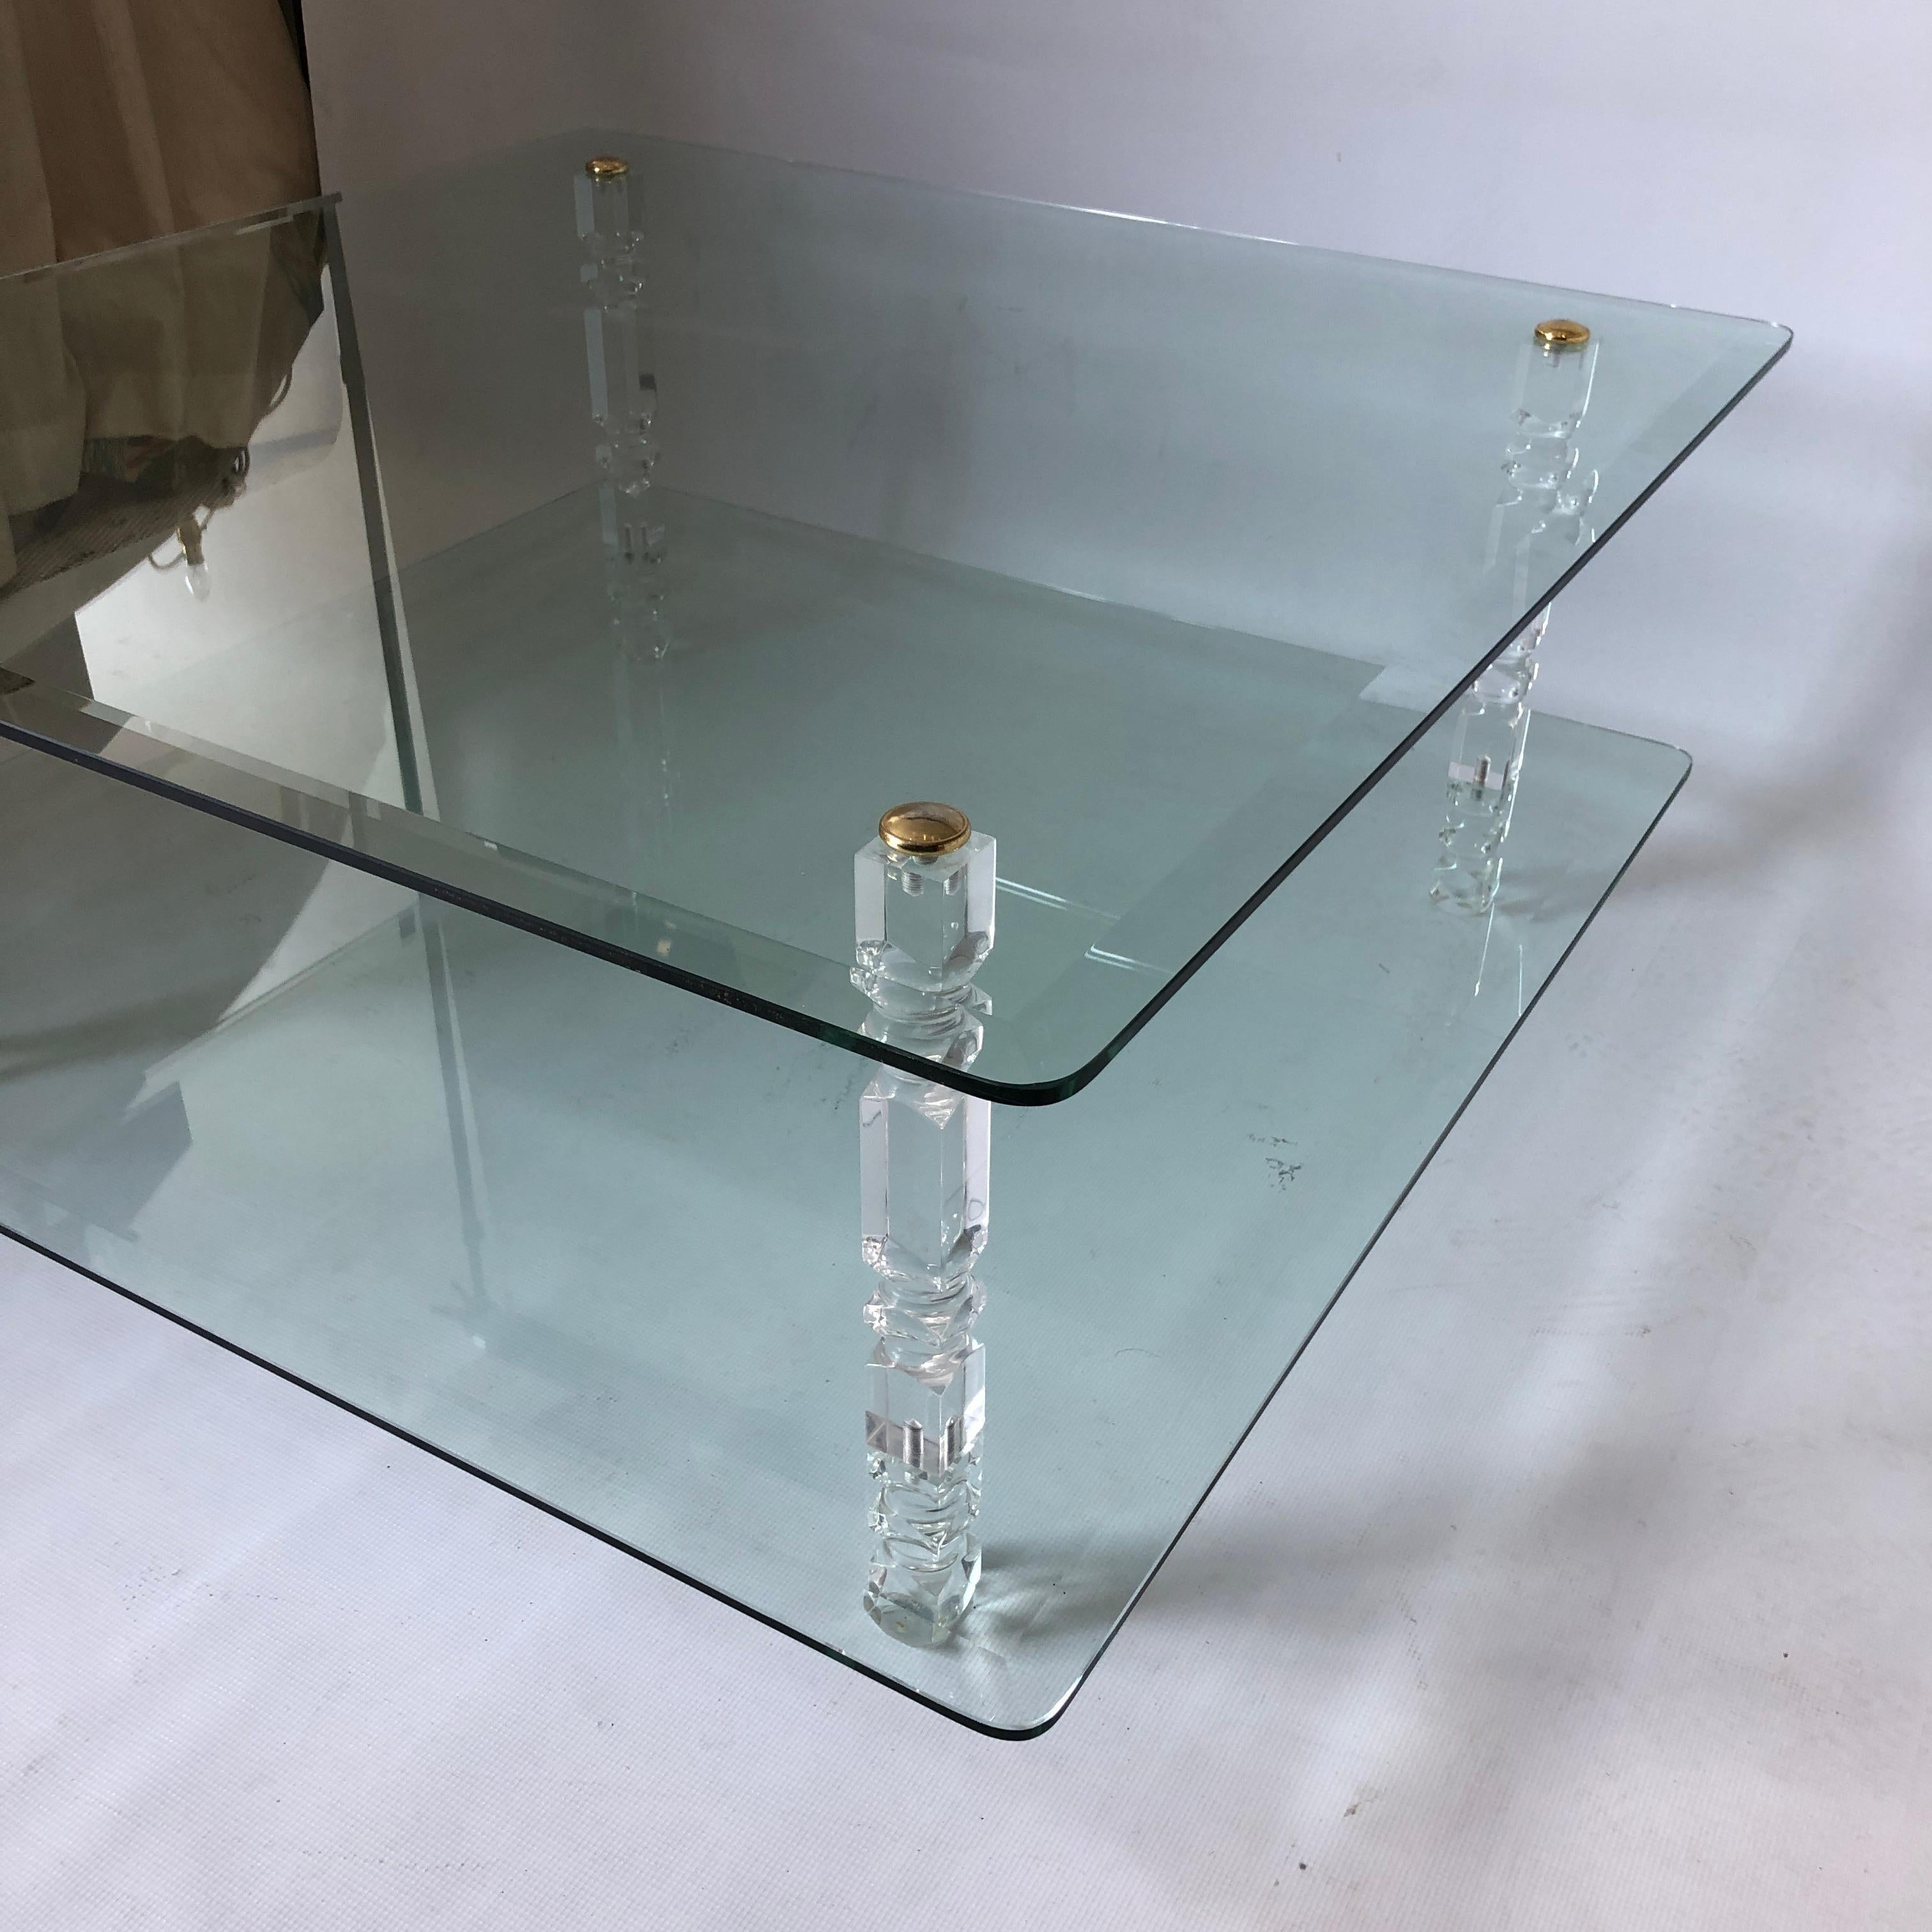 Two-Tier Lucite Glass Brass Coffee Table 1970s Modernist Charles Hollis Jones For Sale 3